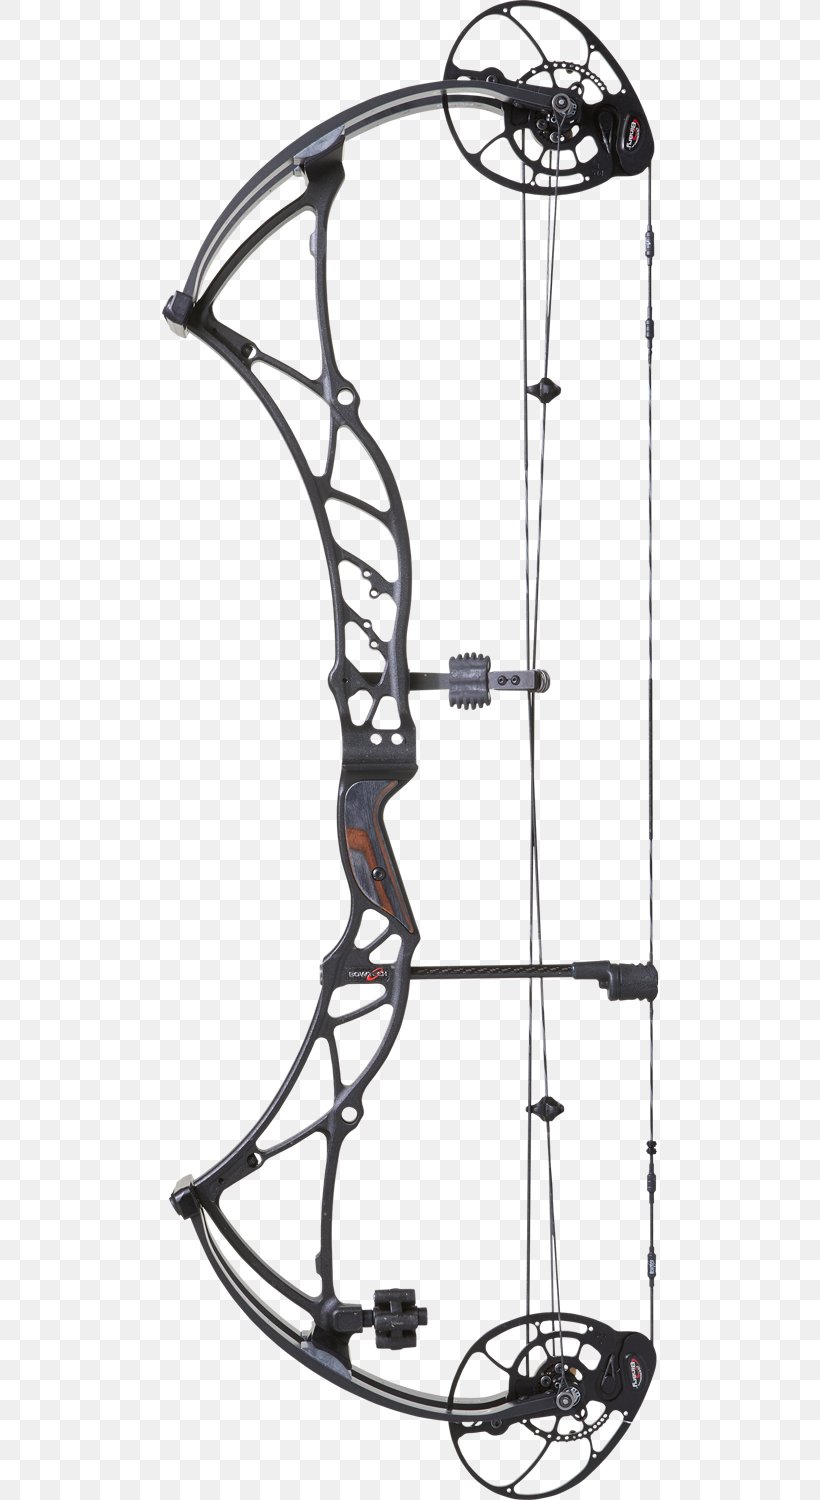 Compound Bows Bow And Arrow Archery Bowhunting, PNG, 500x1500px, Compound Bows, Advanced Archery, Apex Hunting, Archery, Archery Trade Association Download Free